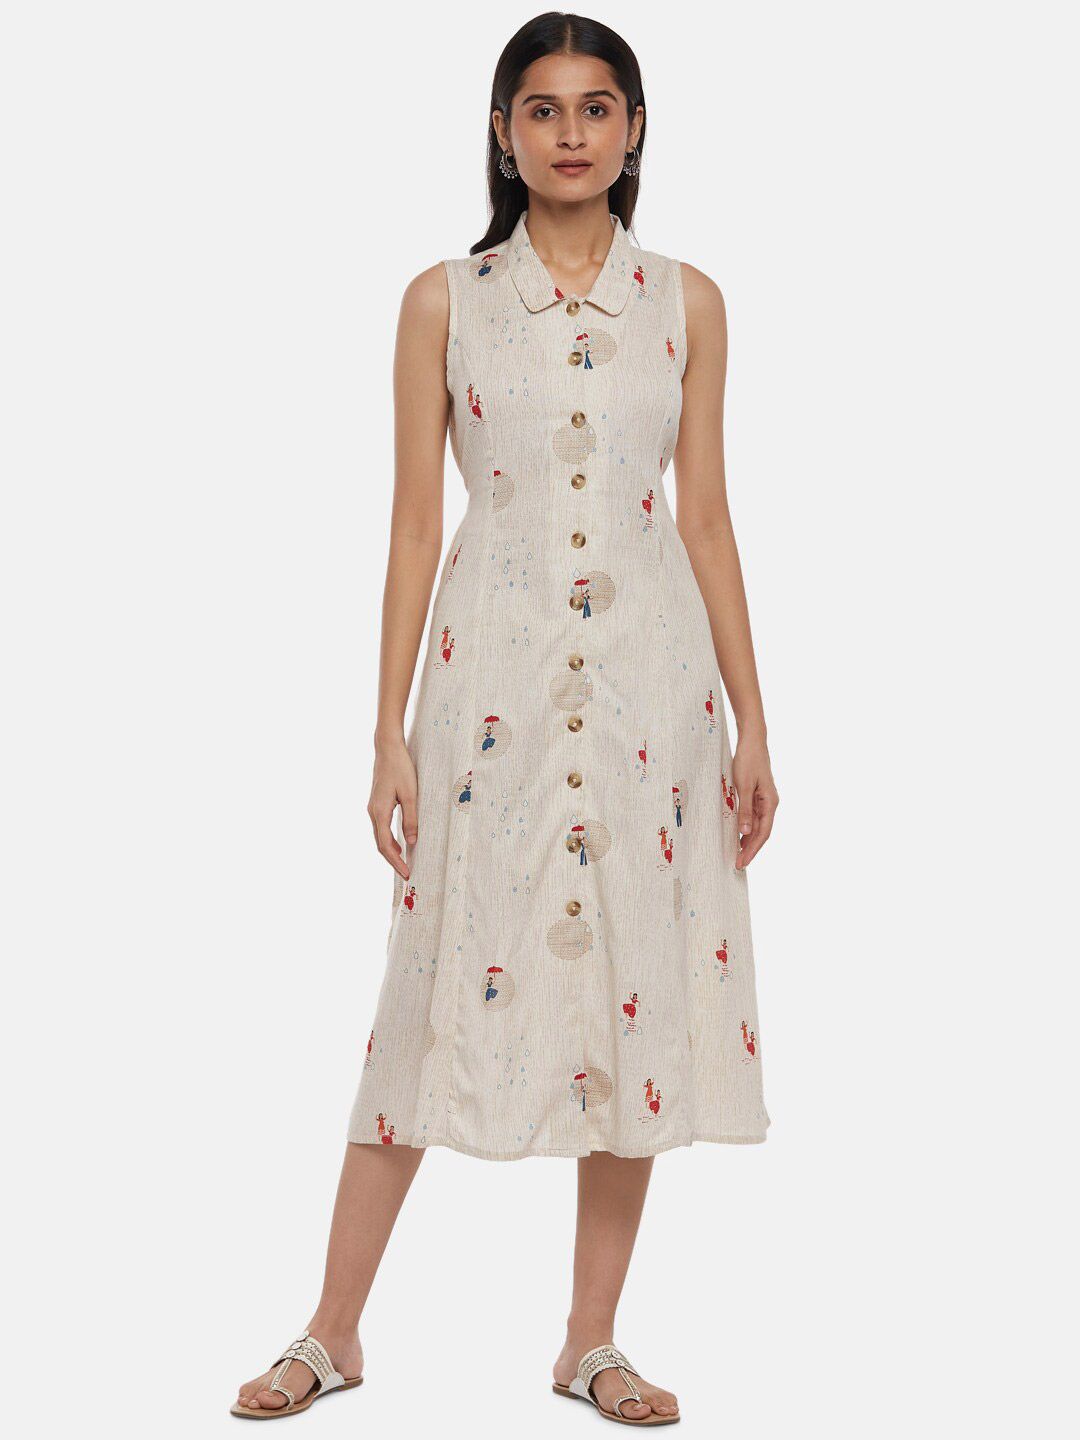 AKKRITI BY PANTALOONS Off White & wind chime Floral Shirt Midi Dress Price in India